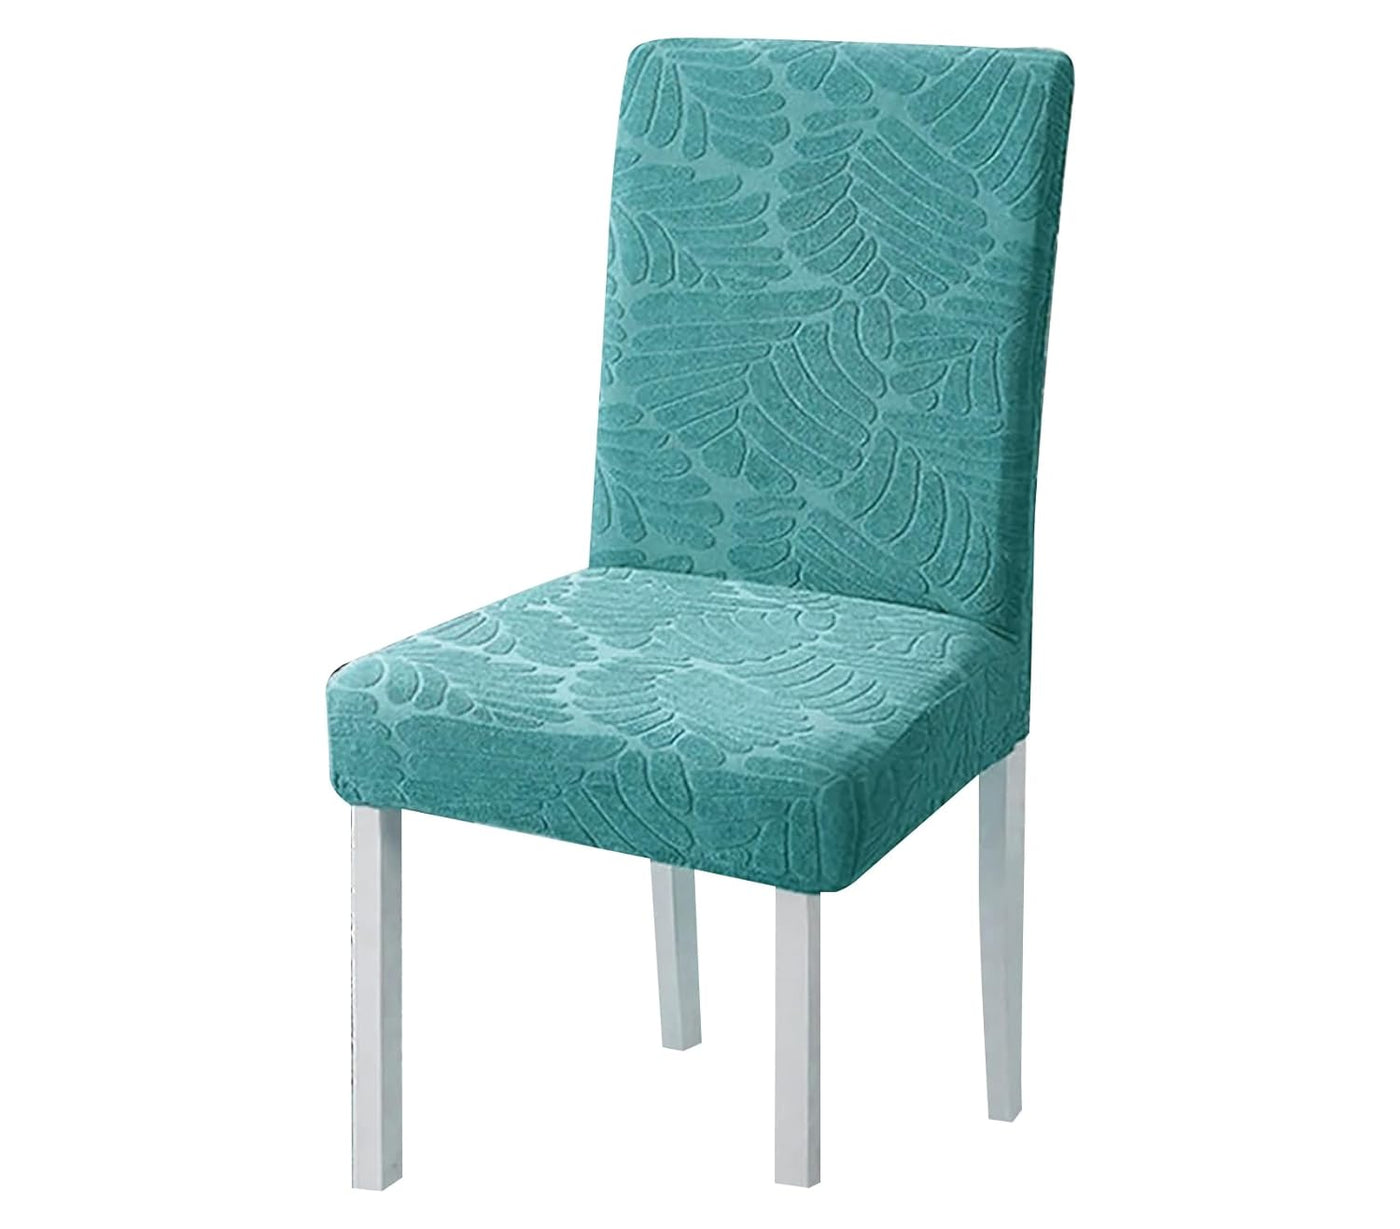 Jacquard Leaf Chair Cover-Teal